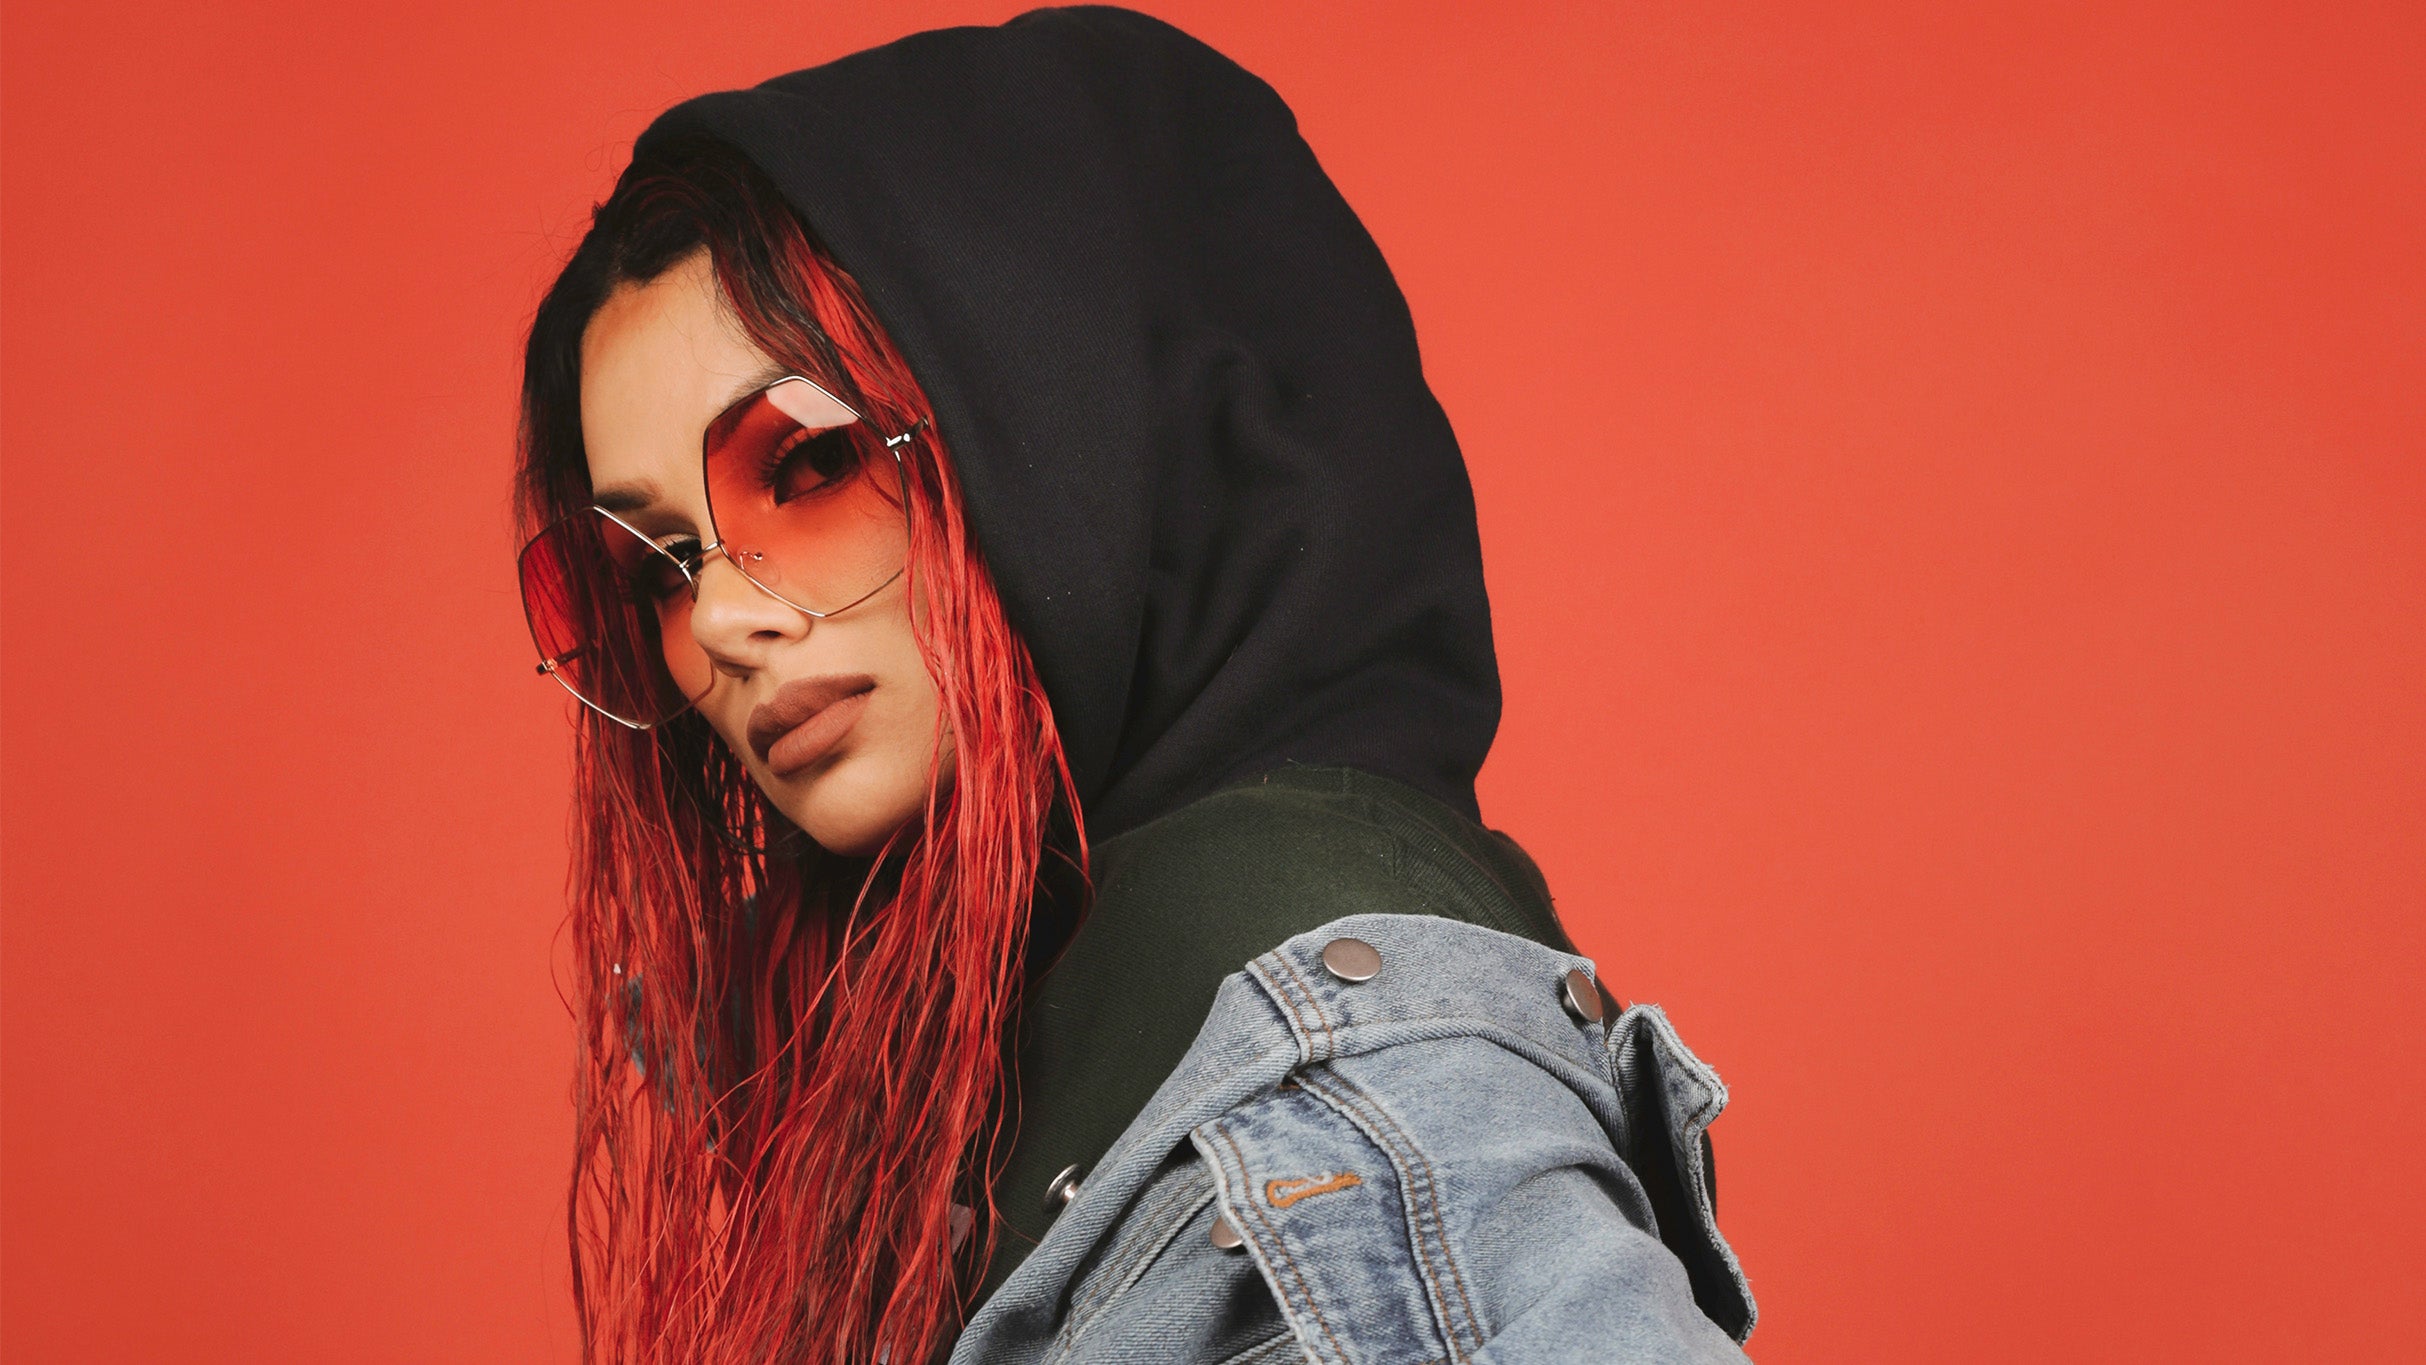 Snow Tha Product - Good Nights And Bad Mornings Tour presale code for performance tickets in Phoenix, AZ (The Van Buren)